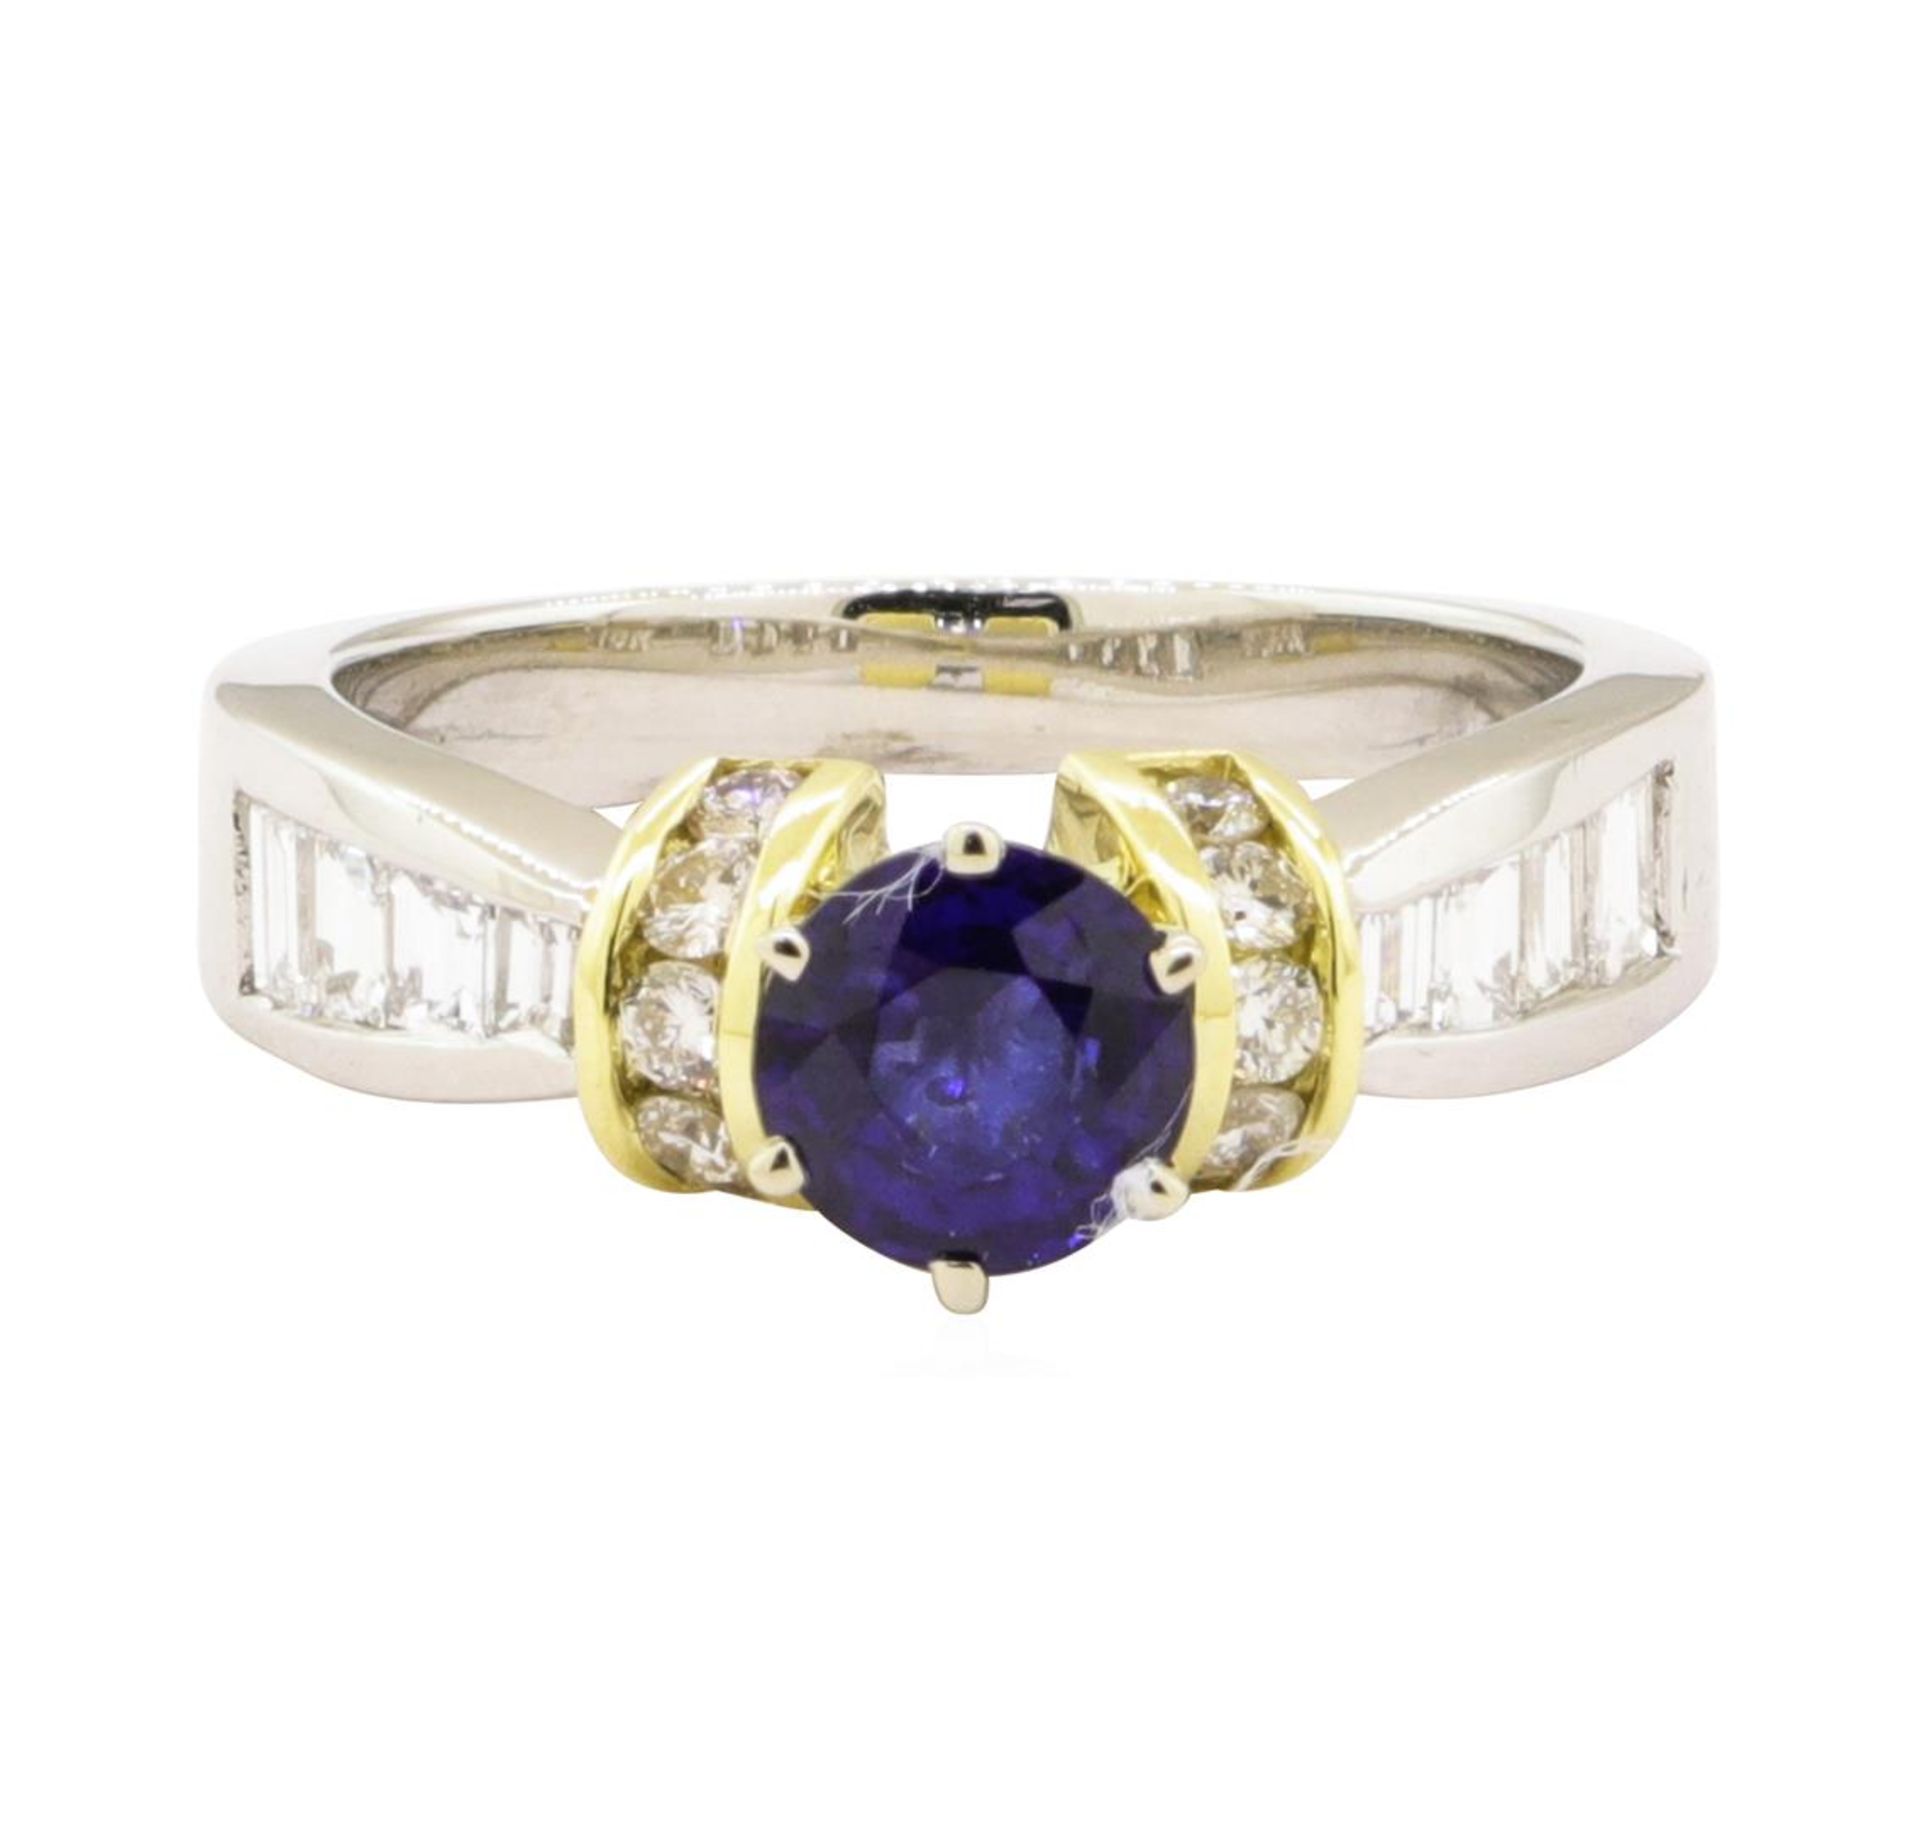 1.65 ctw Blue Sapphire And Diamond Ring - Platinum and 18KT Yellow Gold - Image 2 of 5